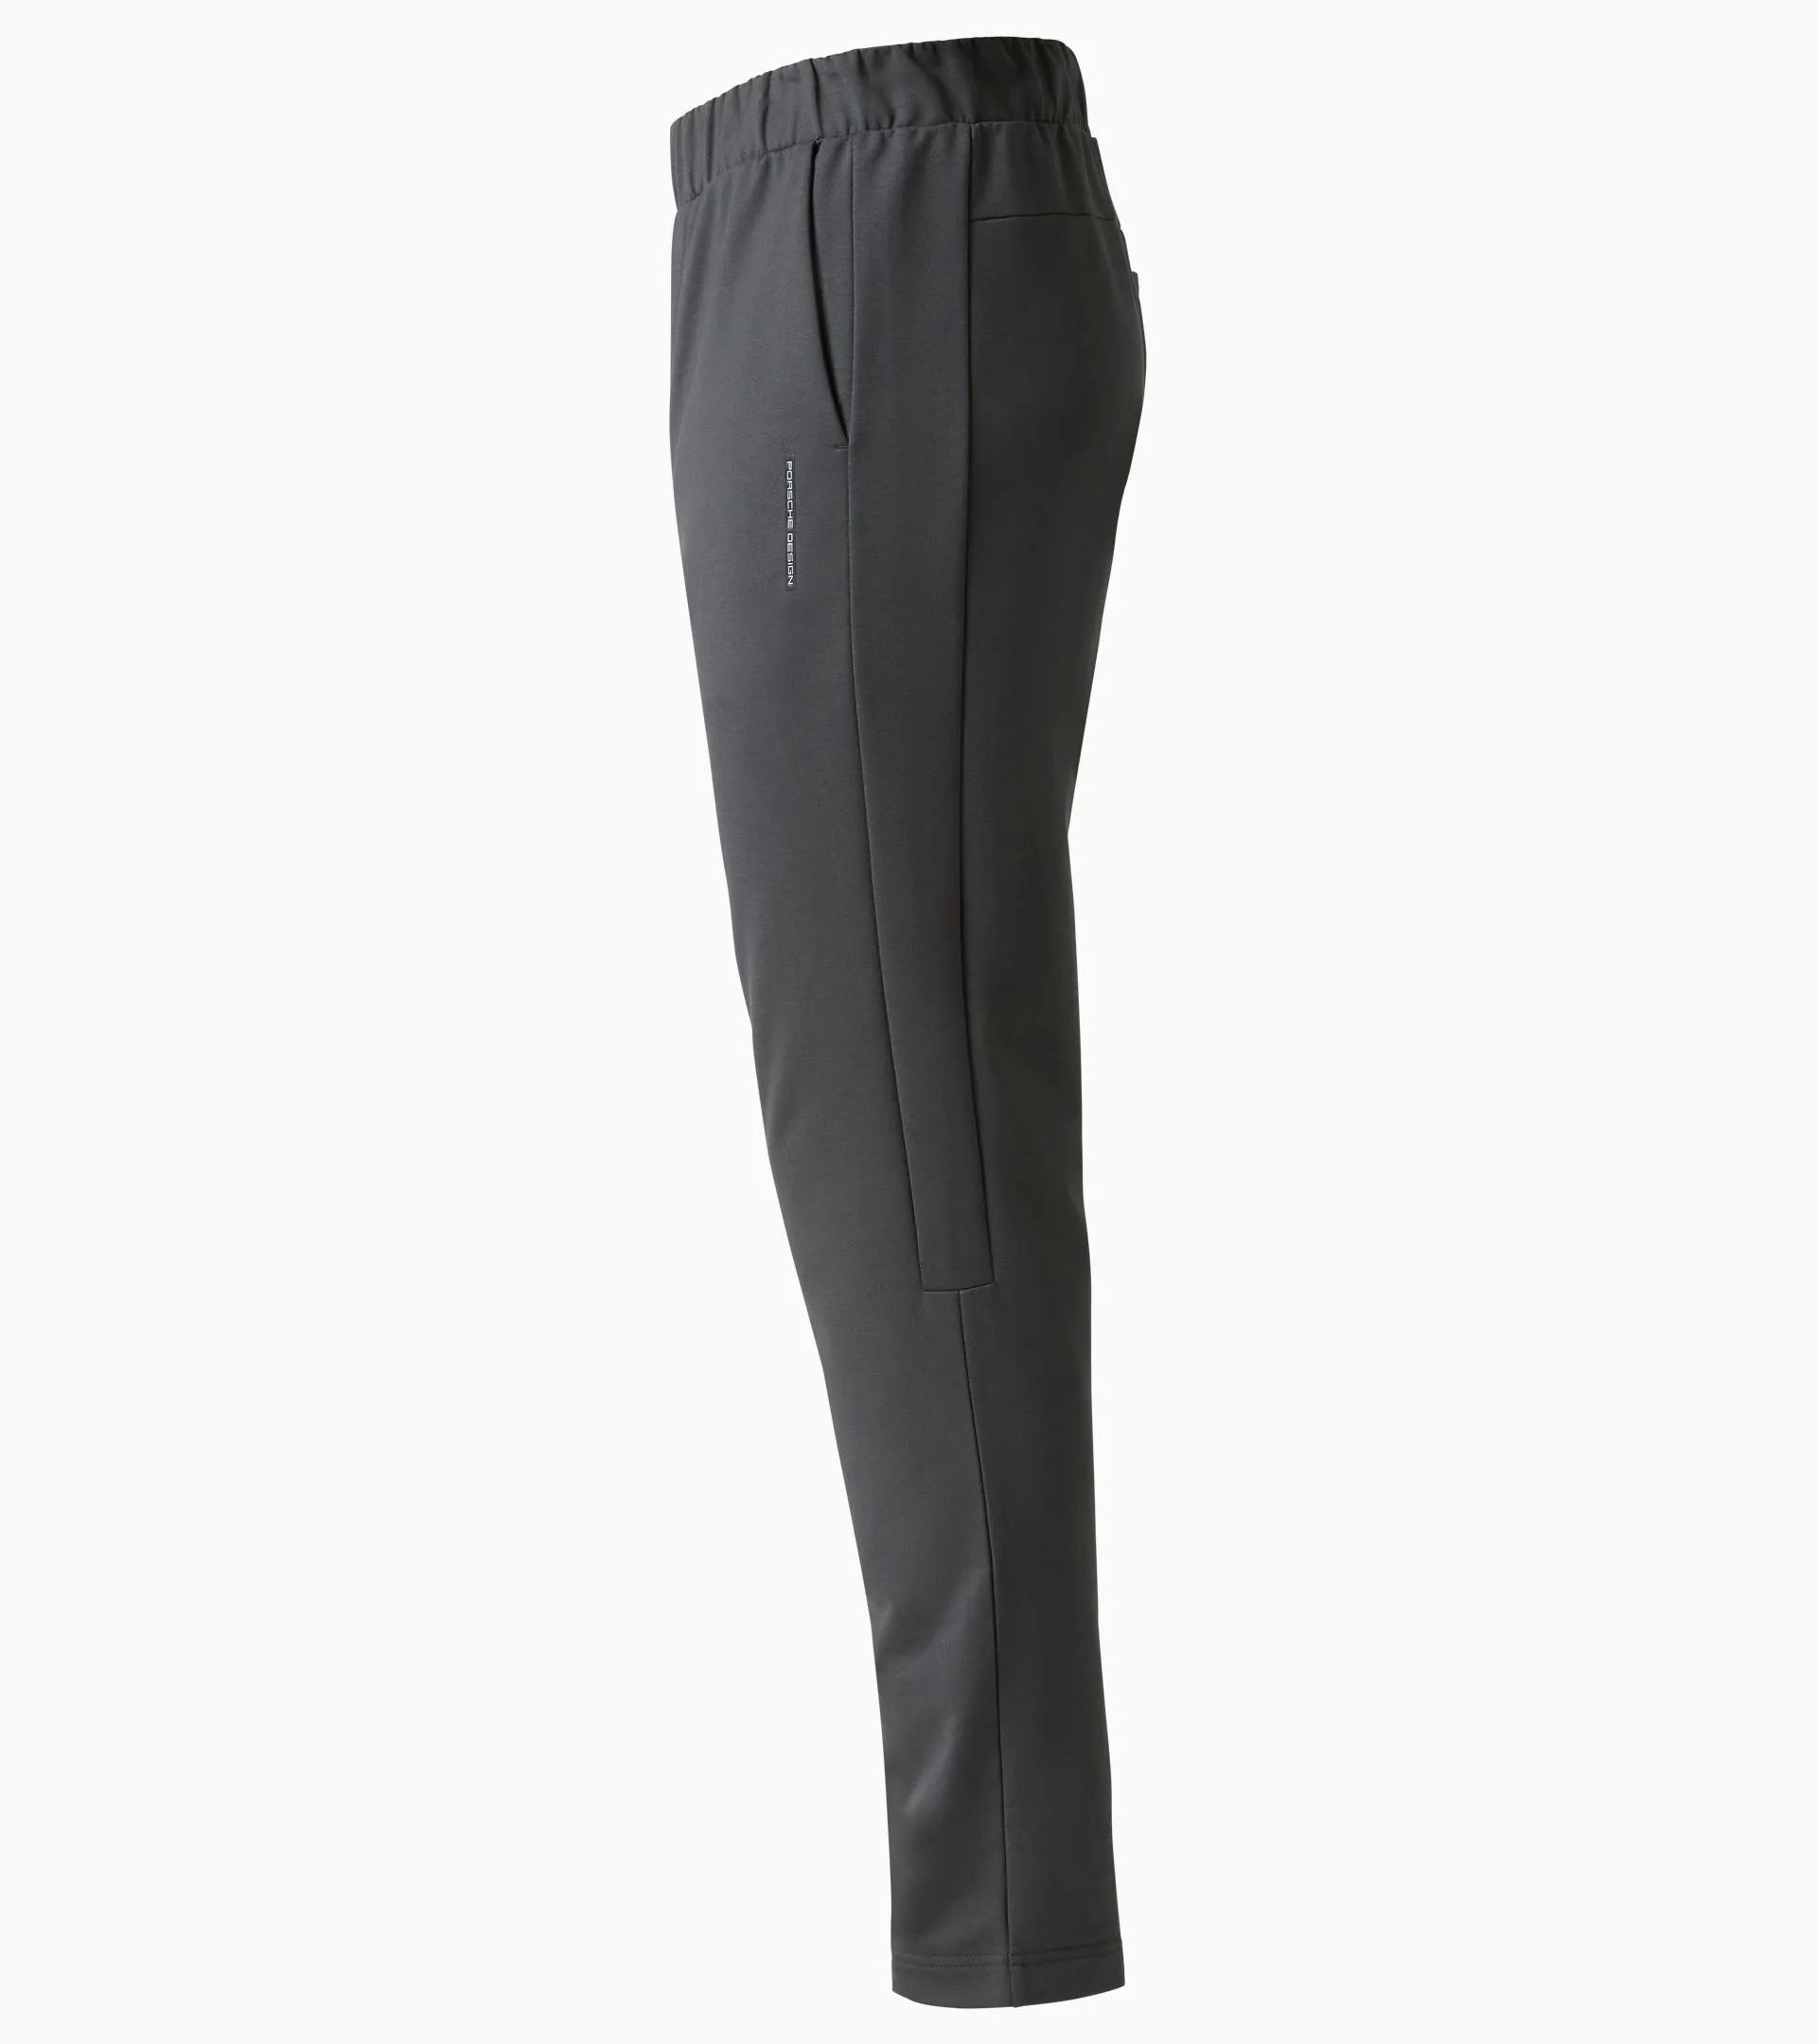 Inset Link Track Pant